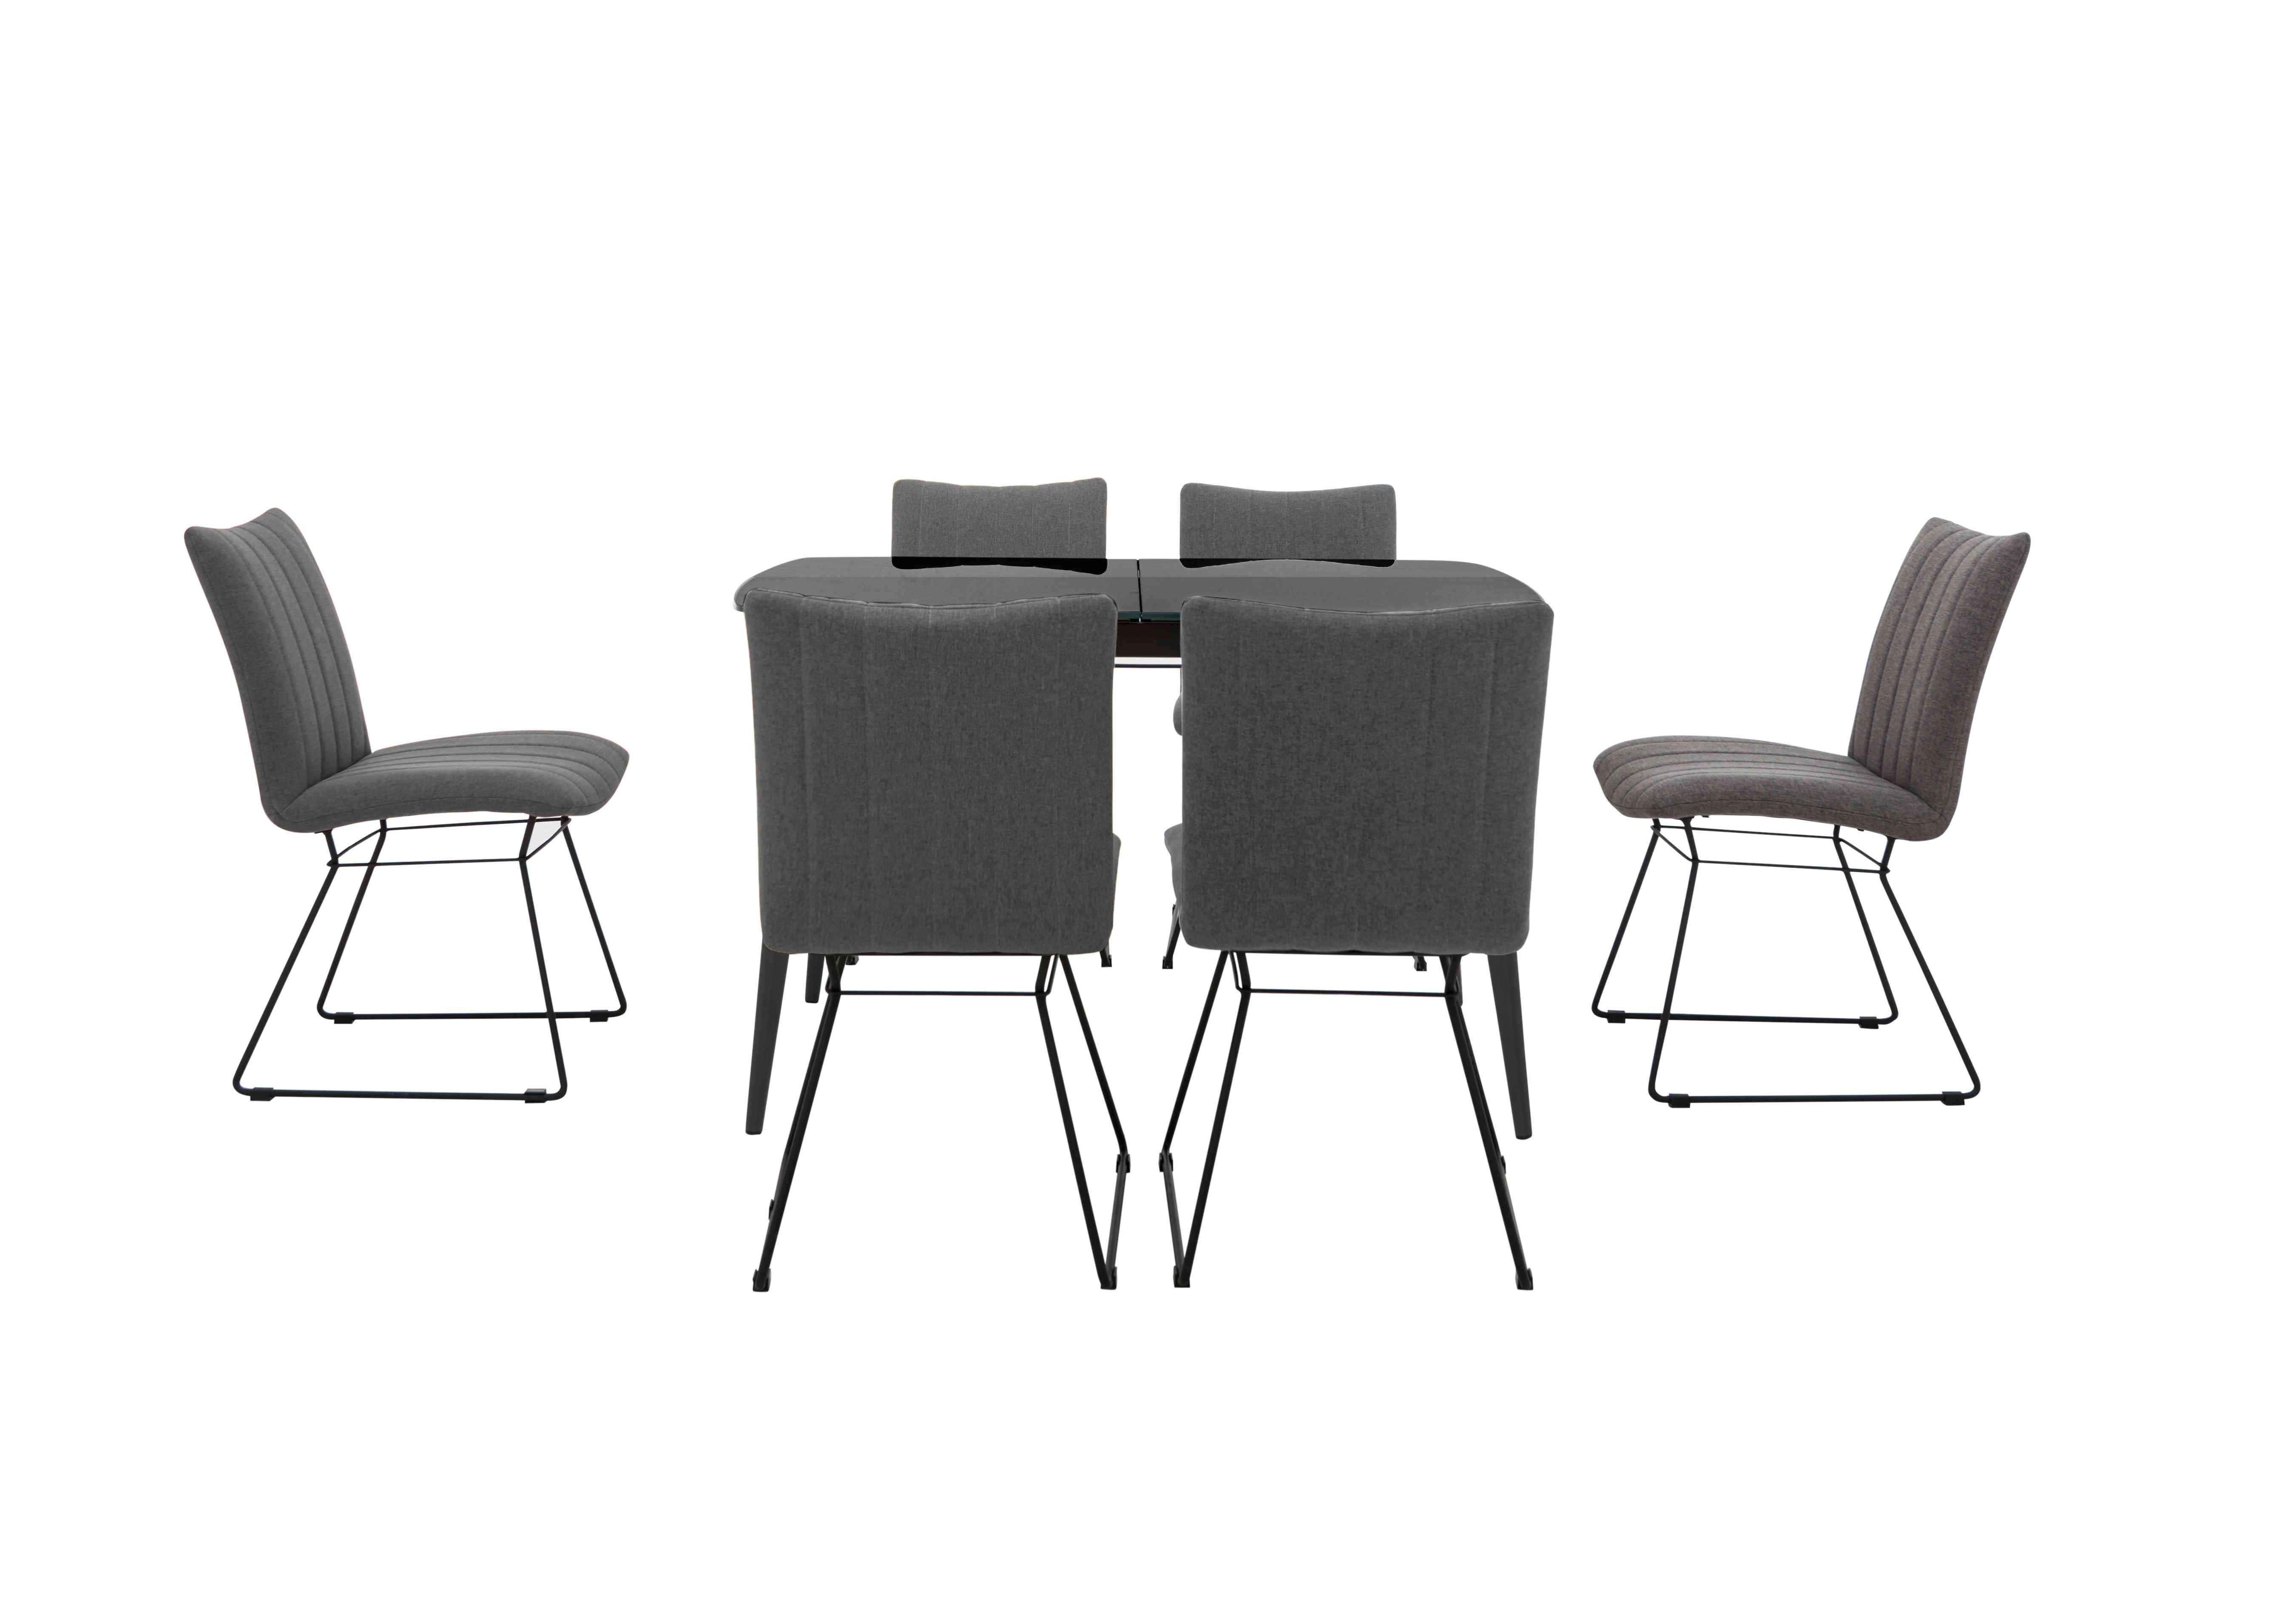 Ace Small Extending Dining Table and 6 Chairs in Grey/Grey on Furniture Village